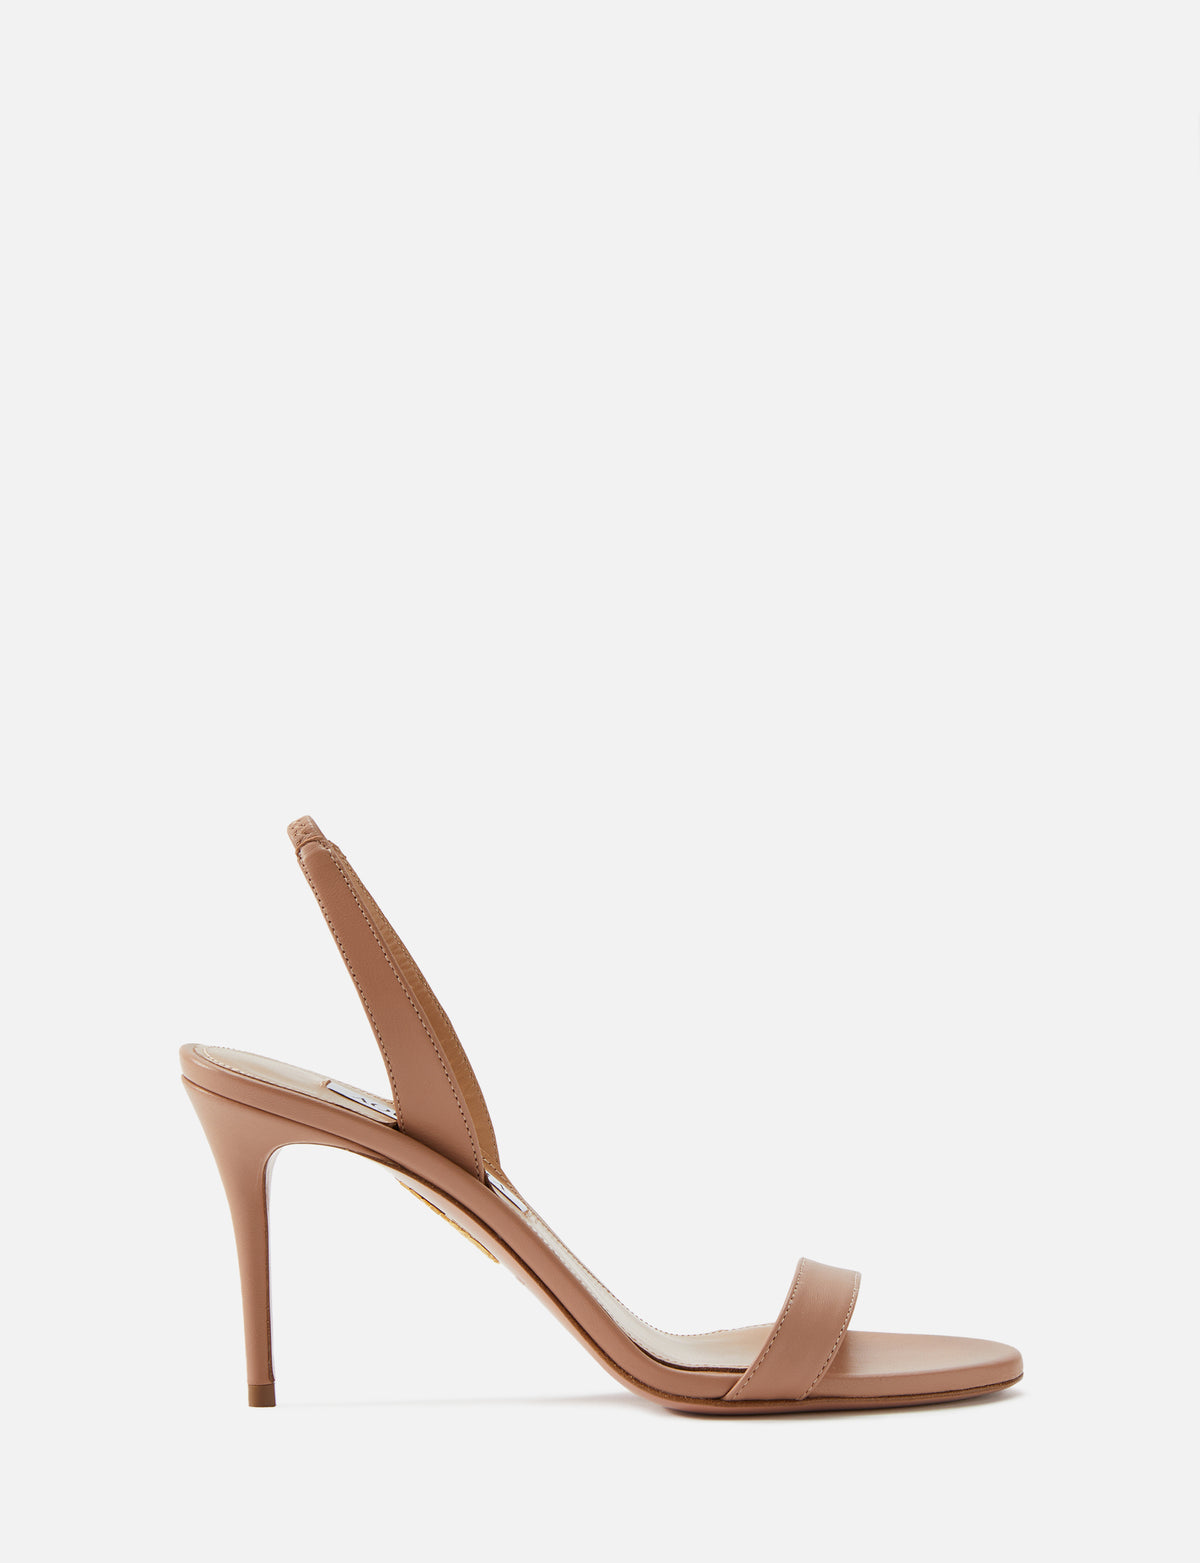 view 1 - So Nude Sandal 85mm